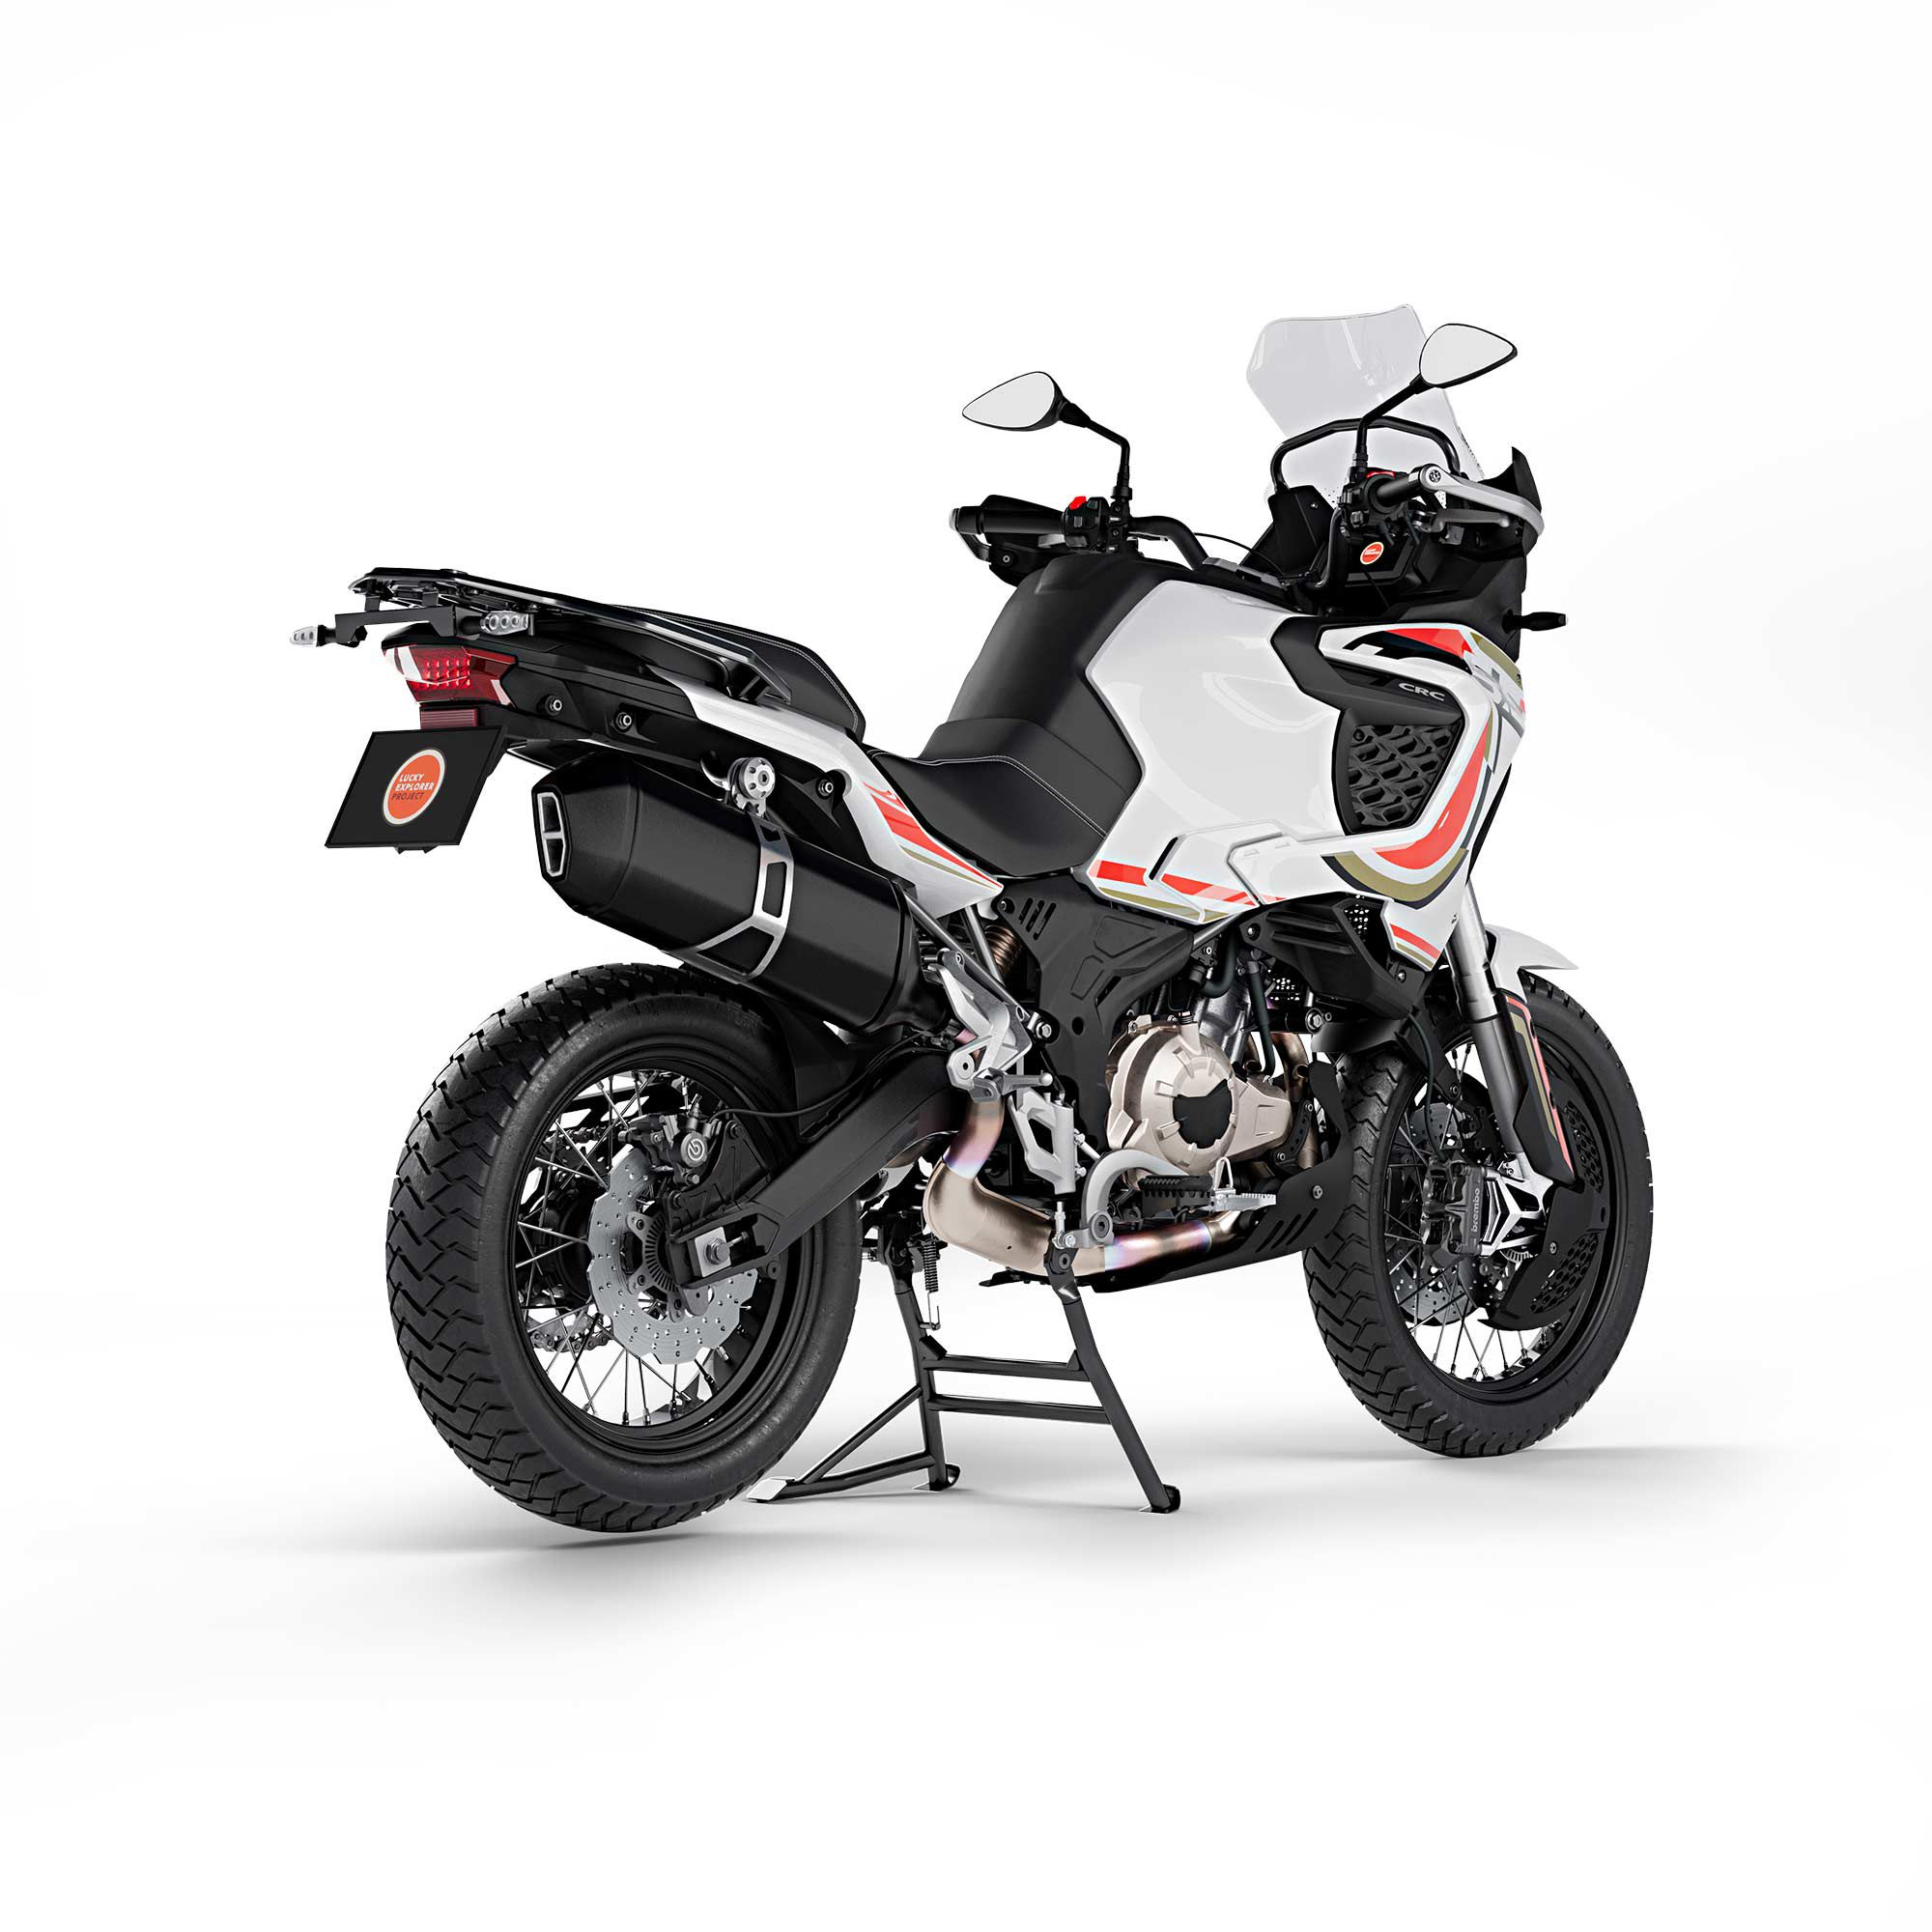 The MV Agusta 5.5 packs a 550cc parallel twin developed in partnership with QJMotors.